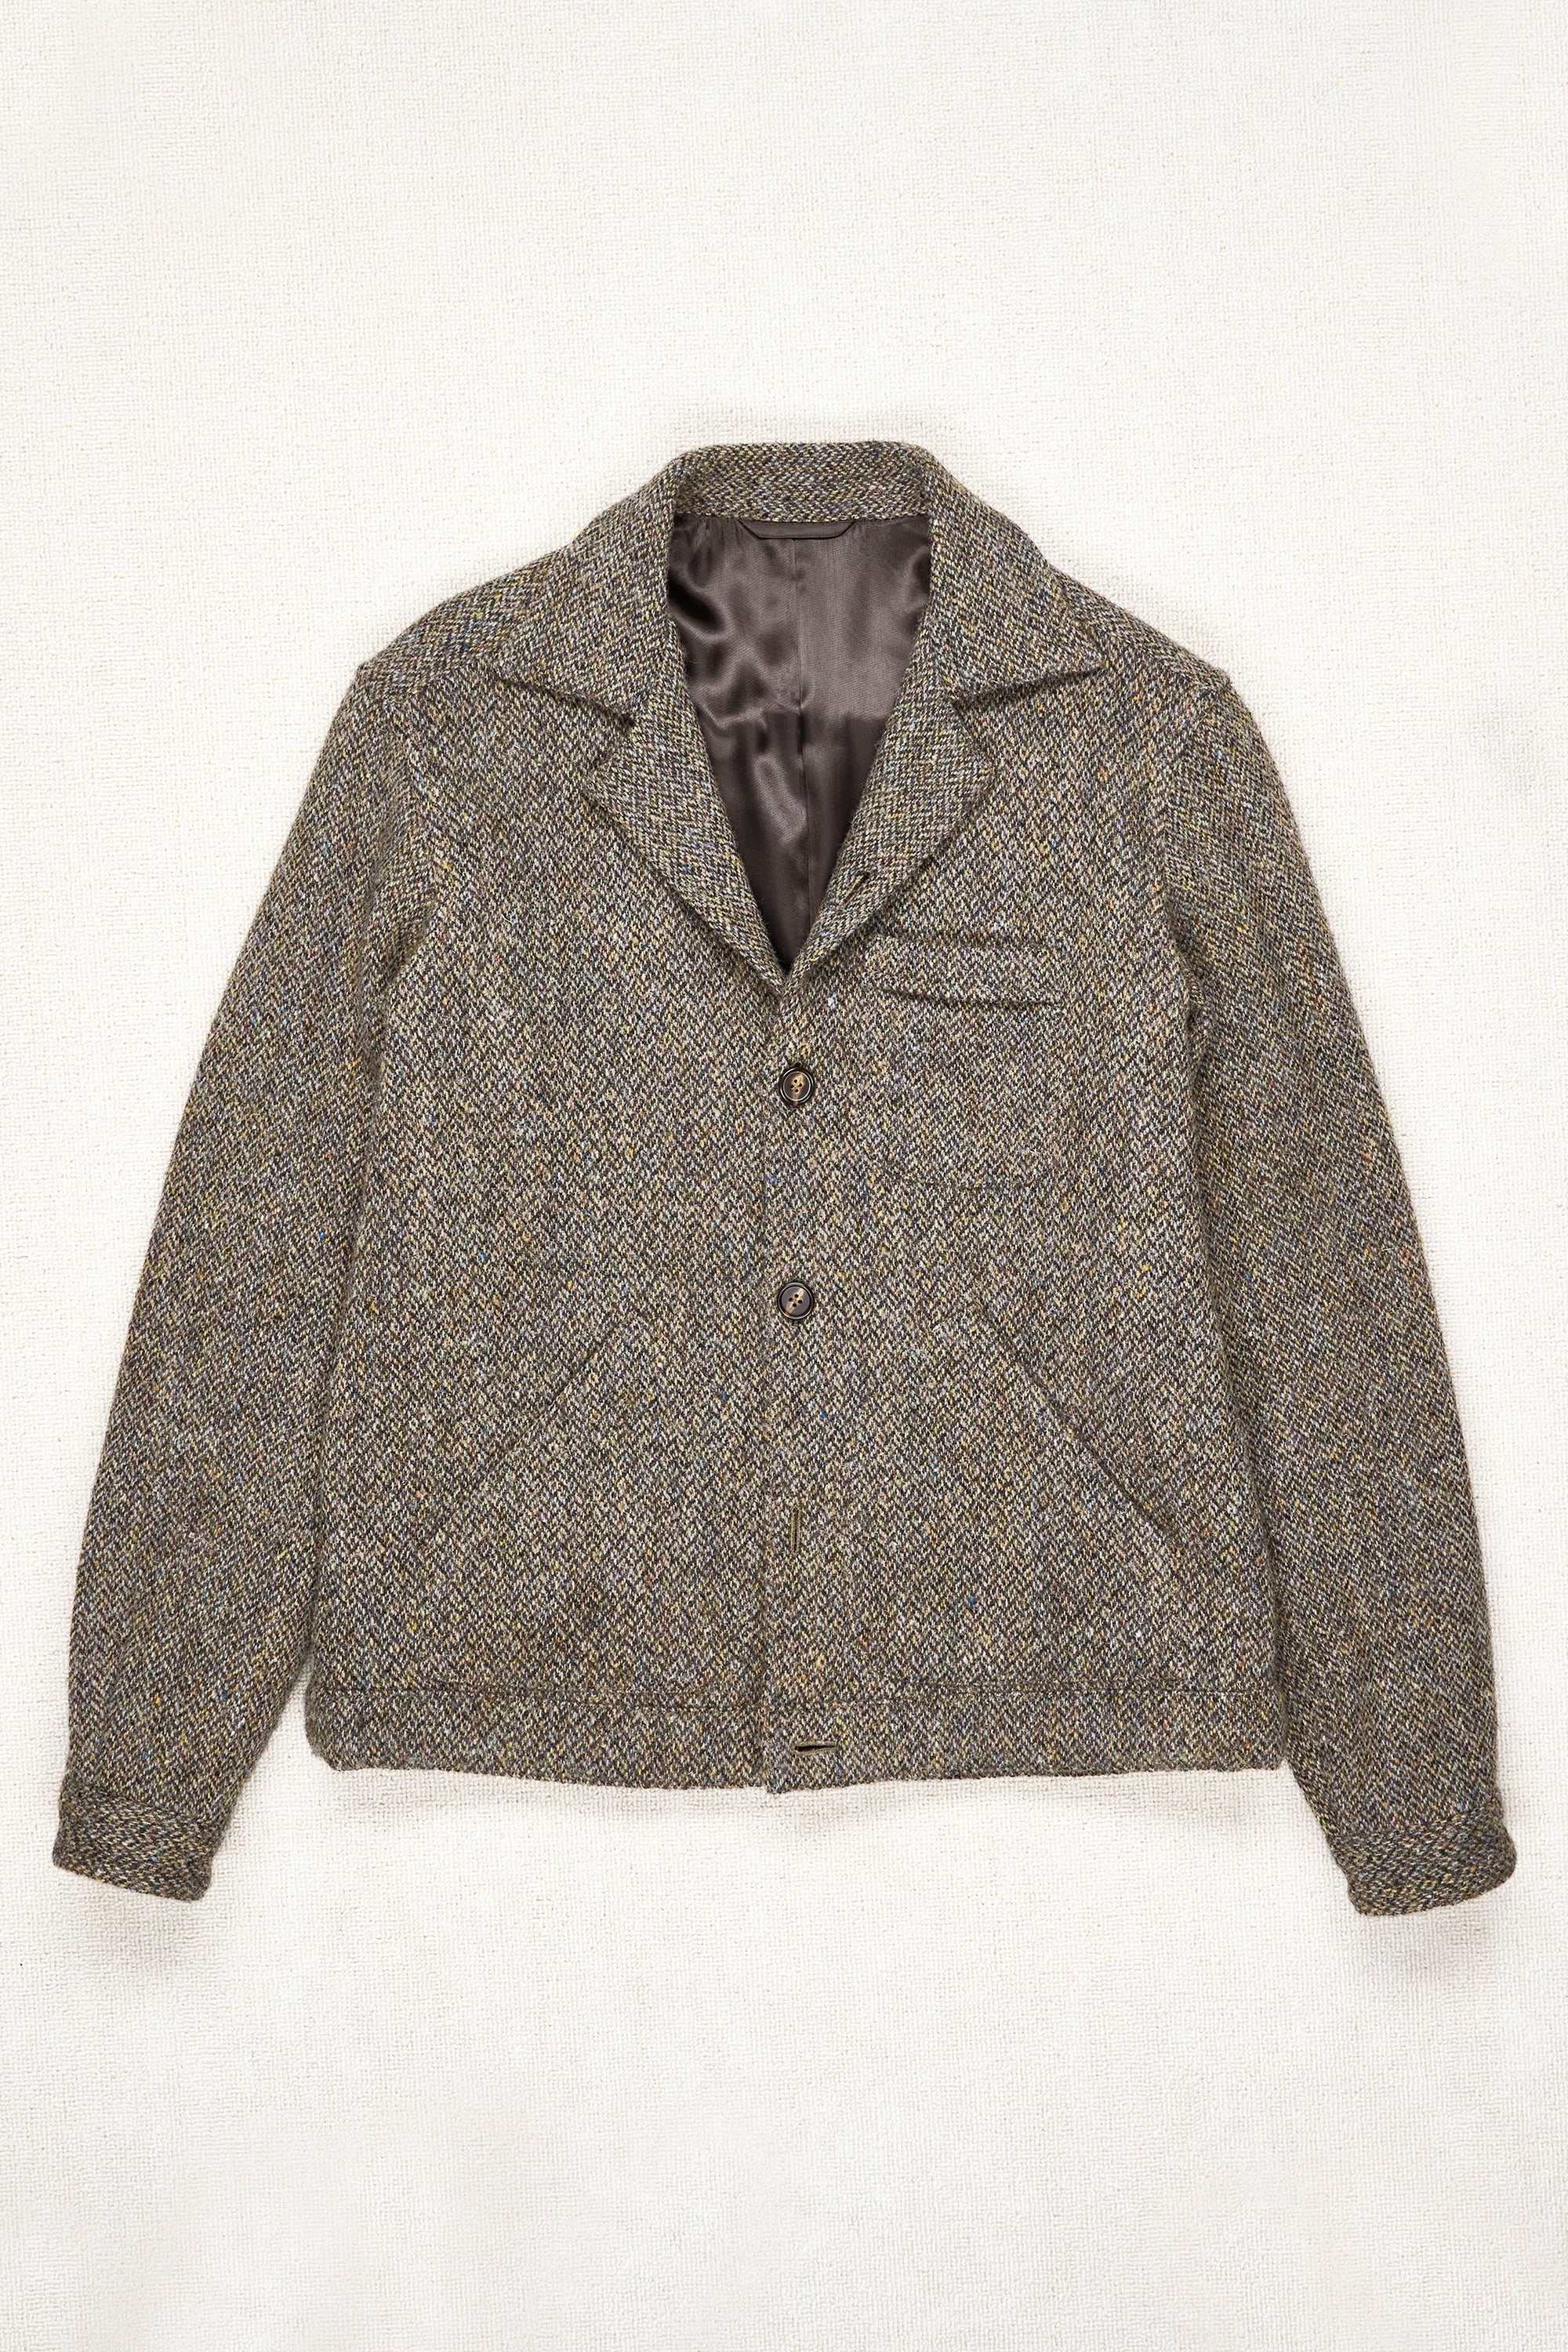 The Armoury Black with Multicolor Wool Tweed 3 Pocket Blouson MTO